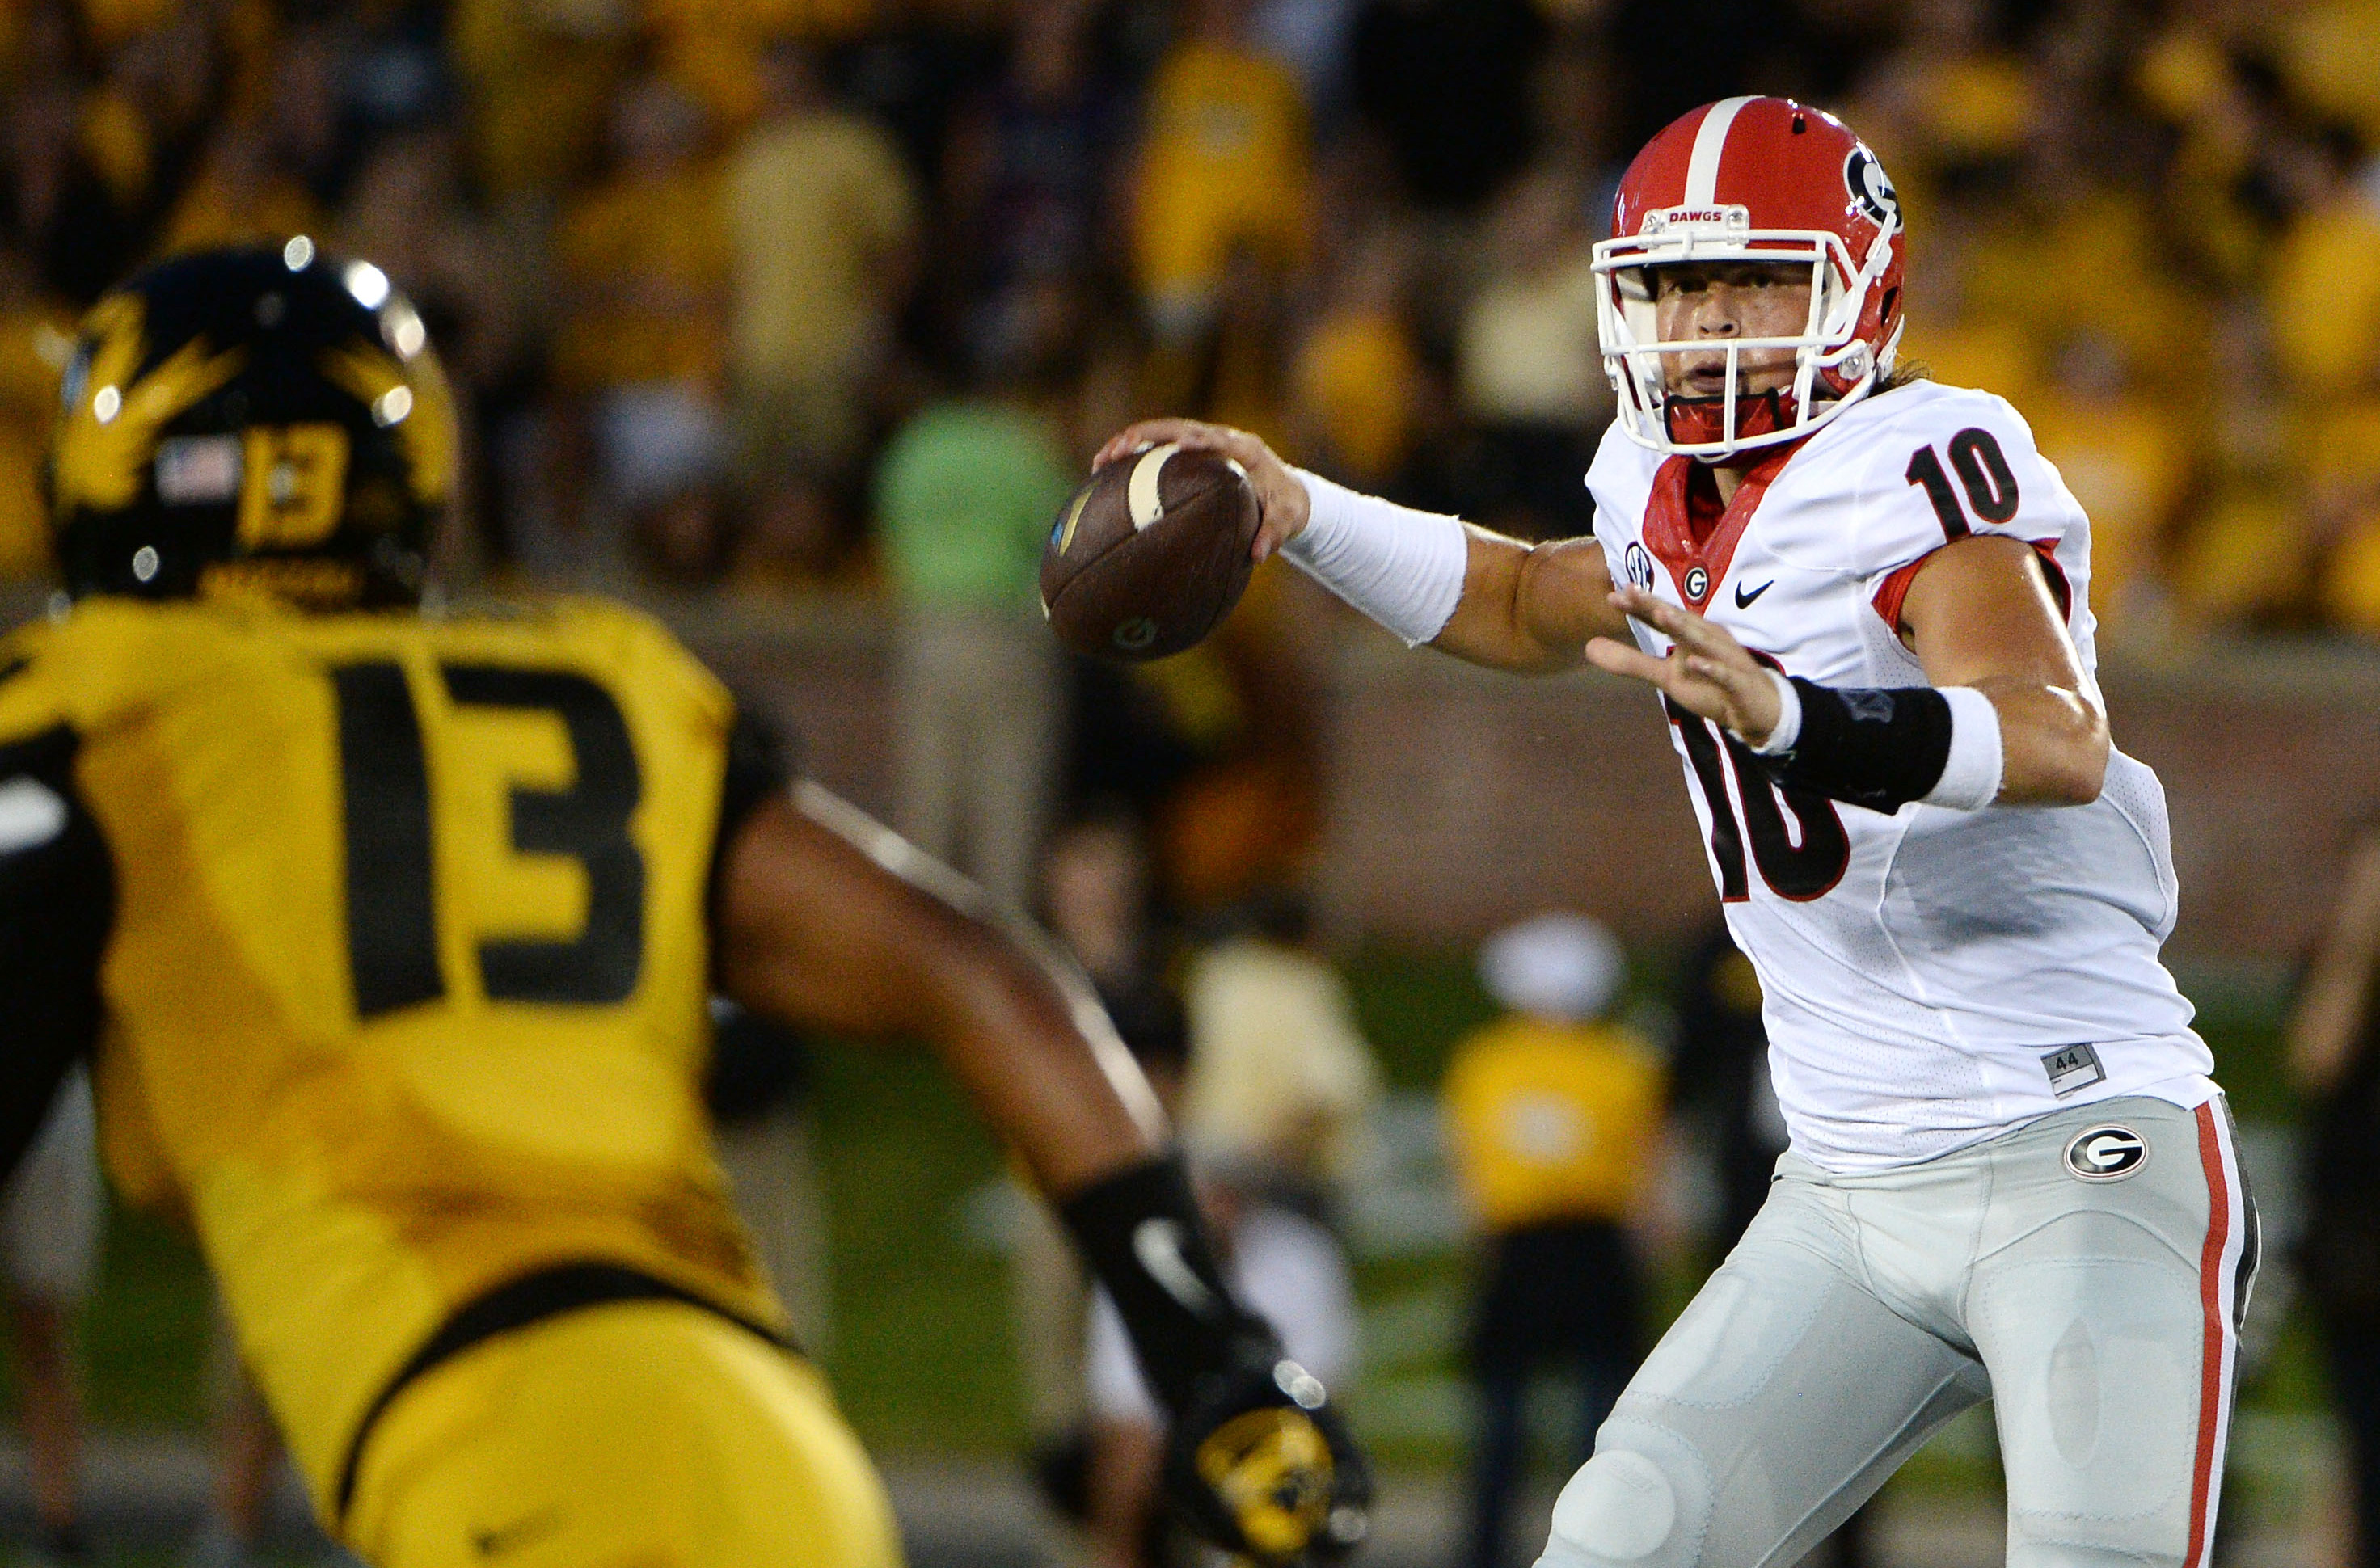 Sep 17, 2016; Columbia, MO, USA; Georgia Bulldogs quarterback Jacob Eason (10) throws the ball against the Missouri Tigers in the first half at Faurot Field. Mandatory Credit: John Rieger-USA TODAY Sports